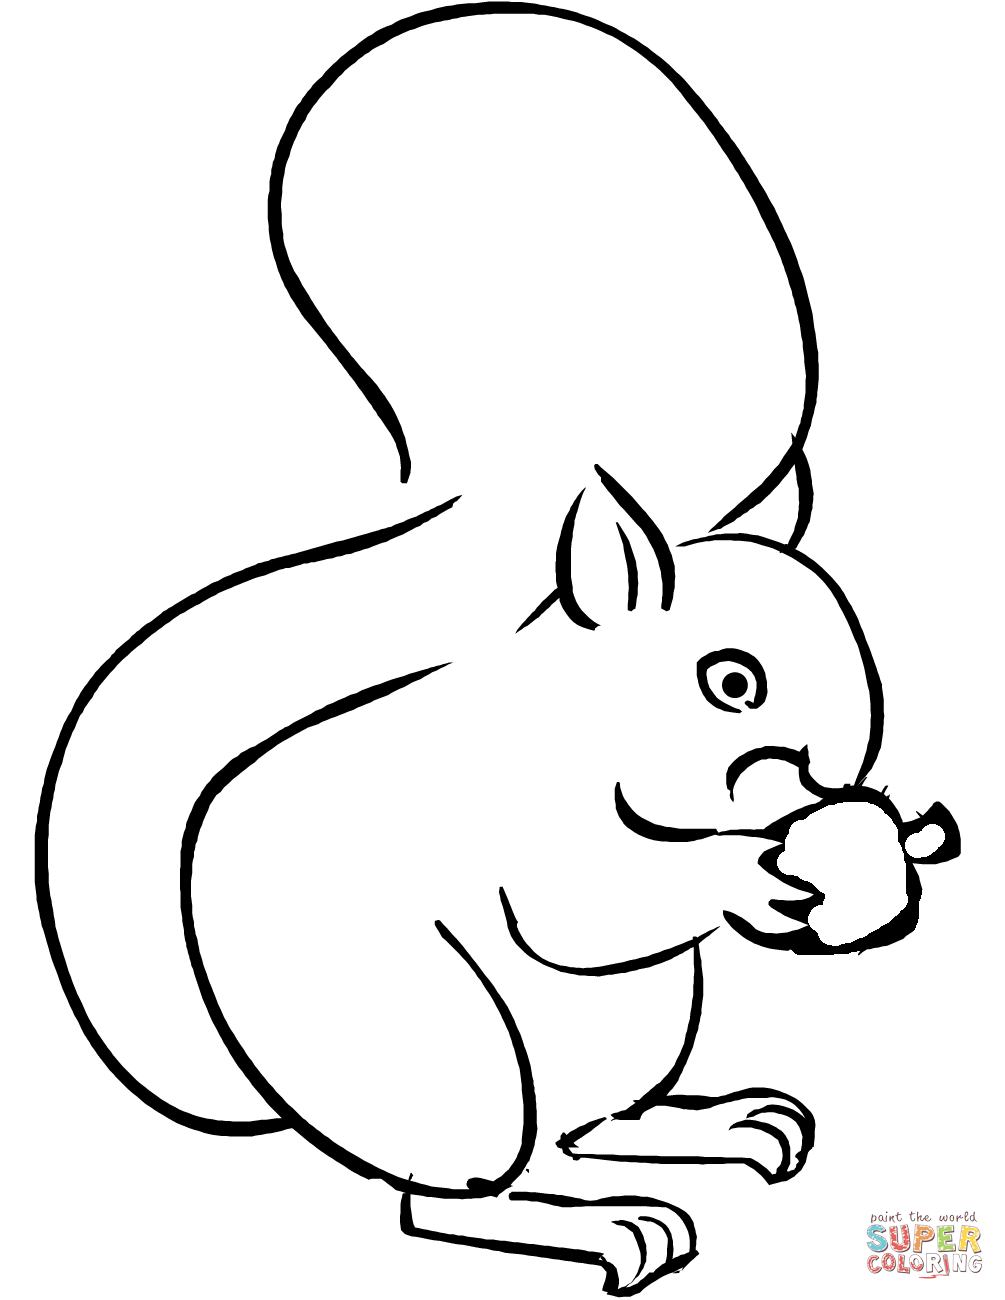 Red Squirrel coloring #13, Download drawings